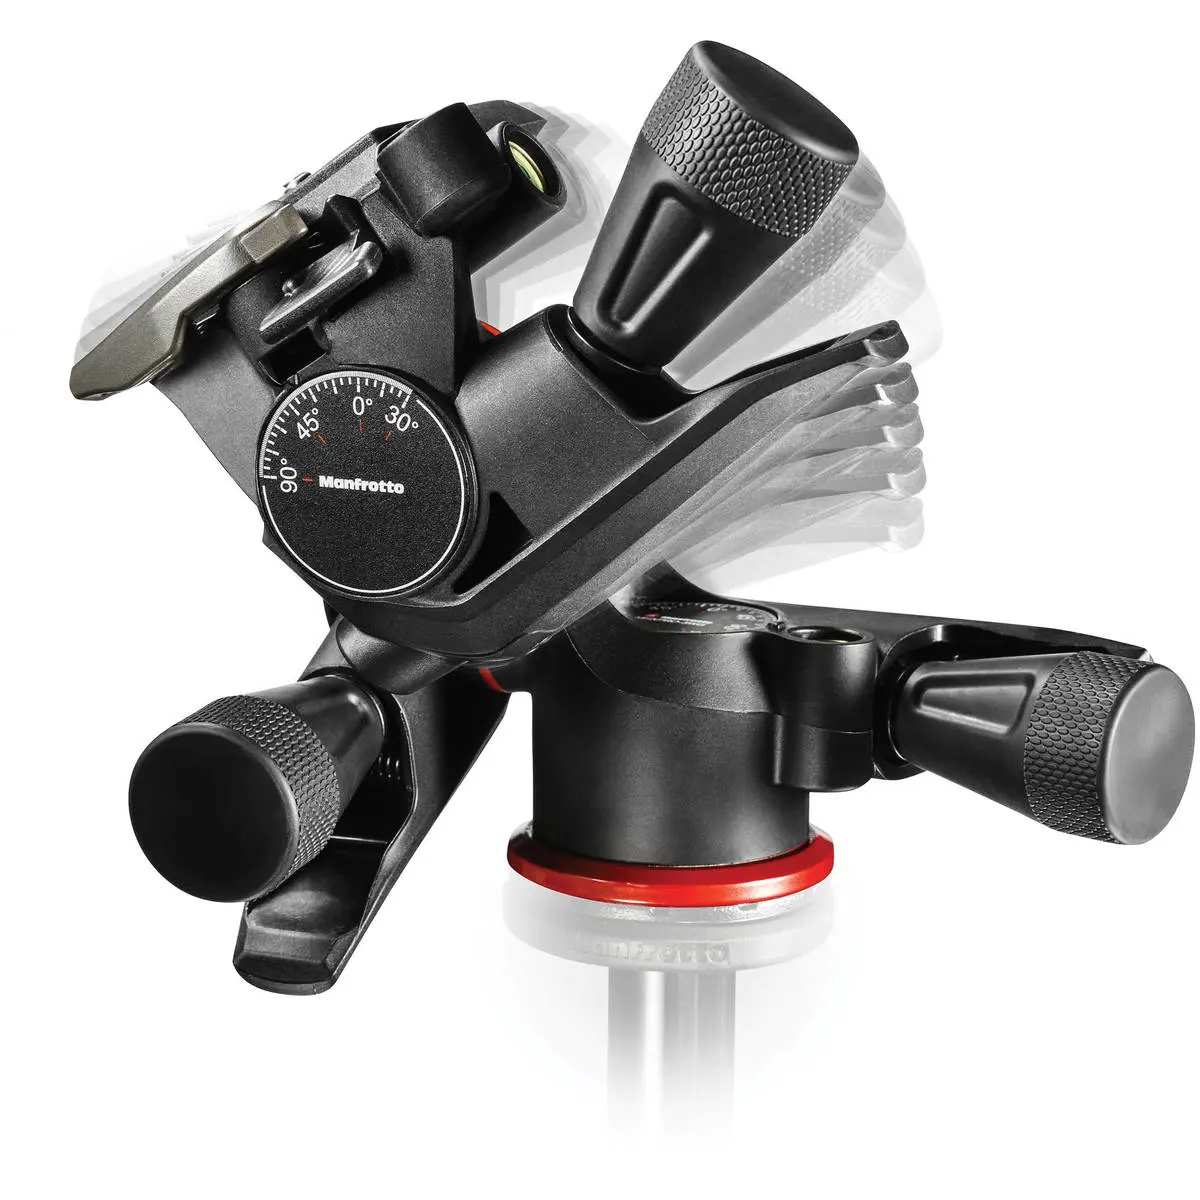 4. Manfrotto Xpro Geared 3-Way Head MHXPRO-3WG